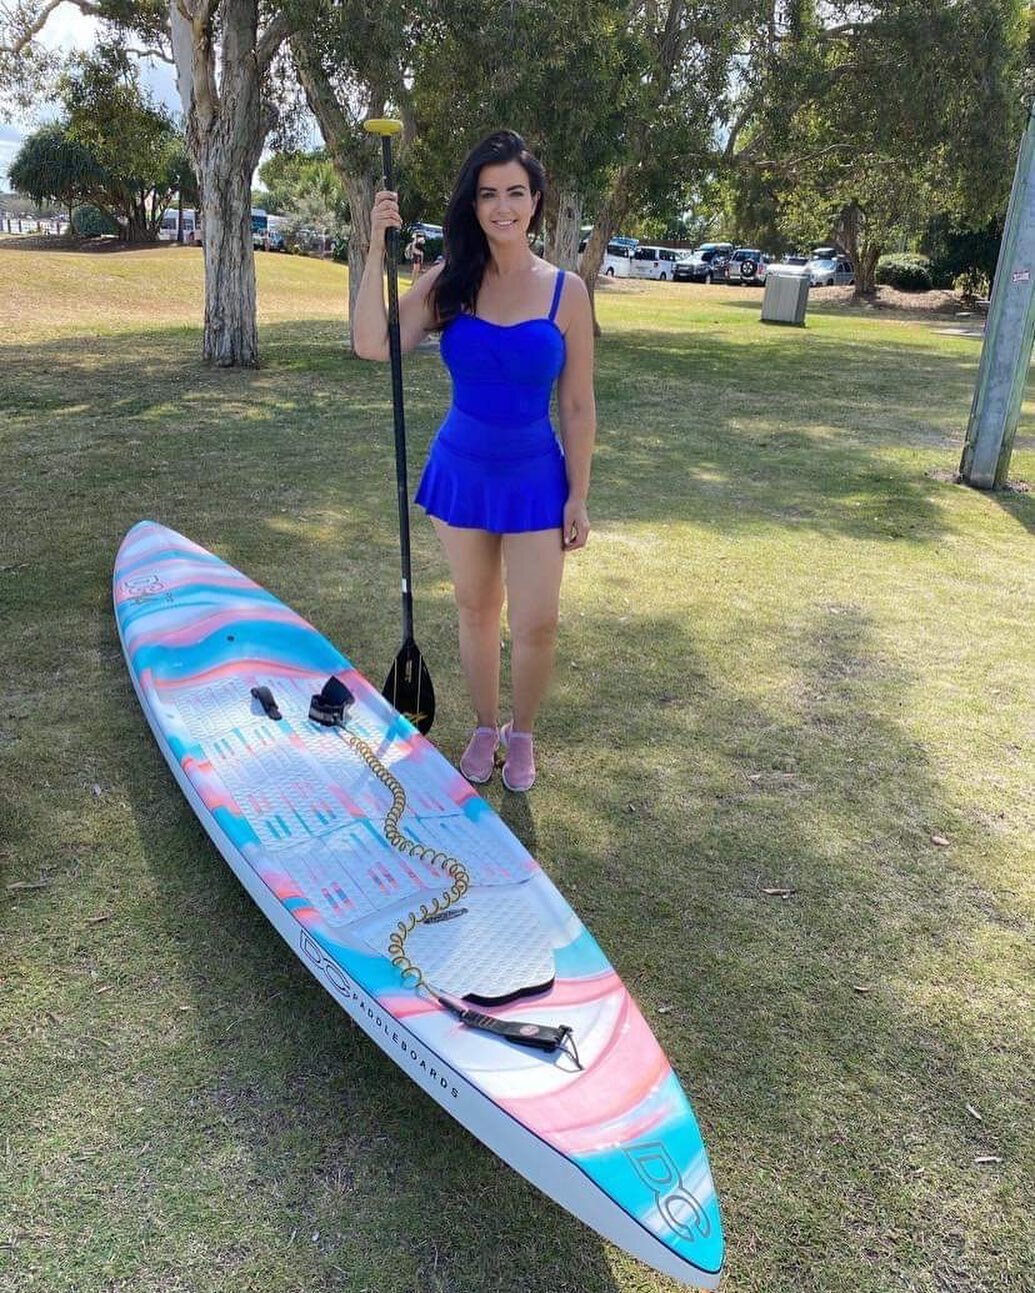 Looking for a pre-loved paddleboard this Christmas 🎄 🎁🎅🏻
For Sale: DC Bay Runner &amp; NEW Naish Paddle $950. 
We loved making this board 14 x 26&ldquo;
DC Bay Runner. One of our favourite DW designs, this board is in excellent condition. It chas